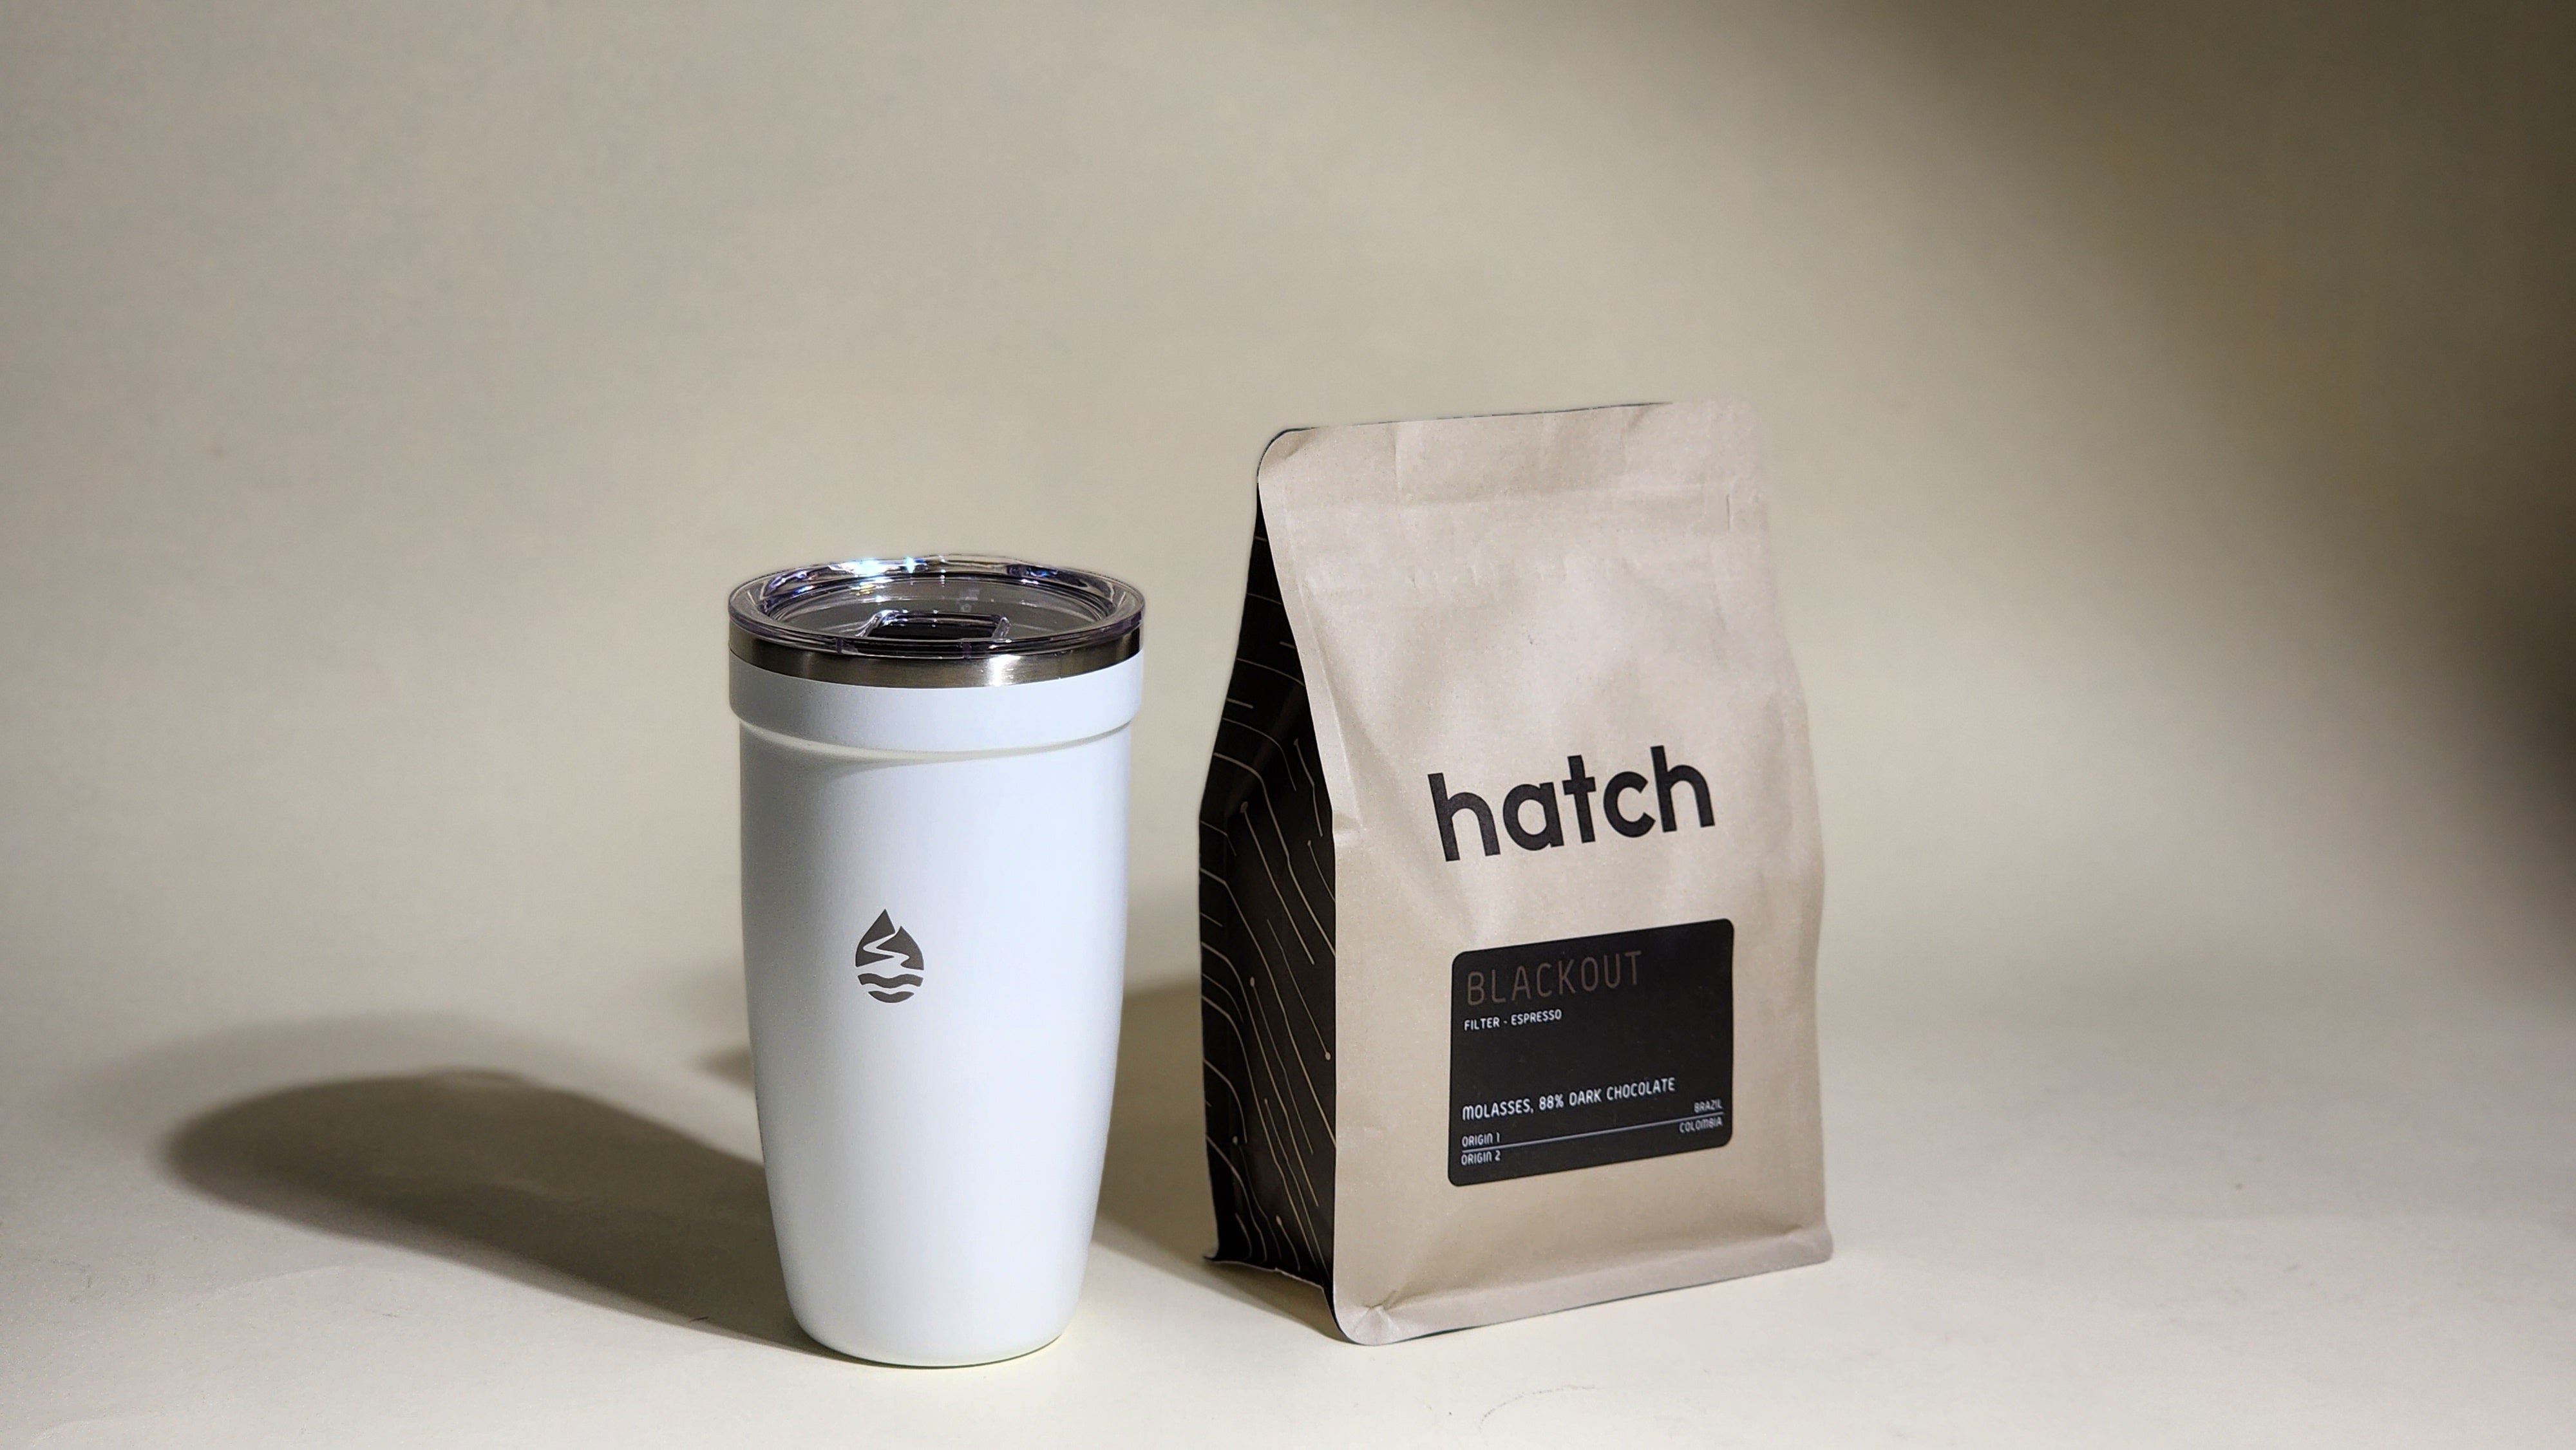 Hatch Coffee - Blackout: A bold blend for comforting days, offering classic flavors with a hint of something new. Crafted from Brazilian and Colombian beans, featuring tasting notes of molasses and 88% dark chocolate. Ideal for bold espresso and filter brewing. Explore our core coffee offerings: Supernova, Starlight, Gamma, and Blackout blends.